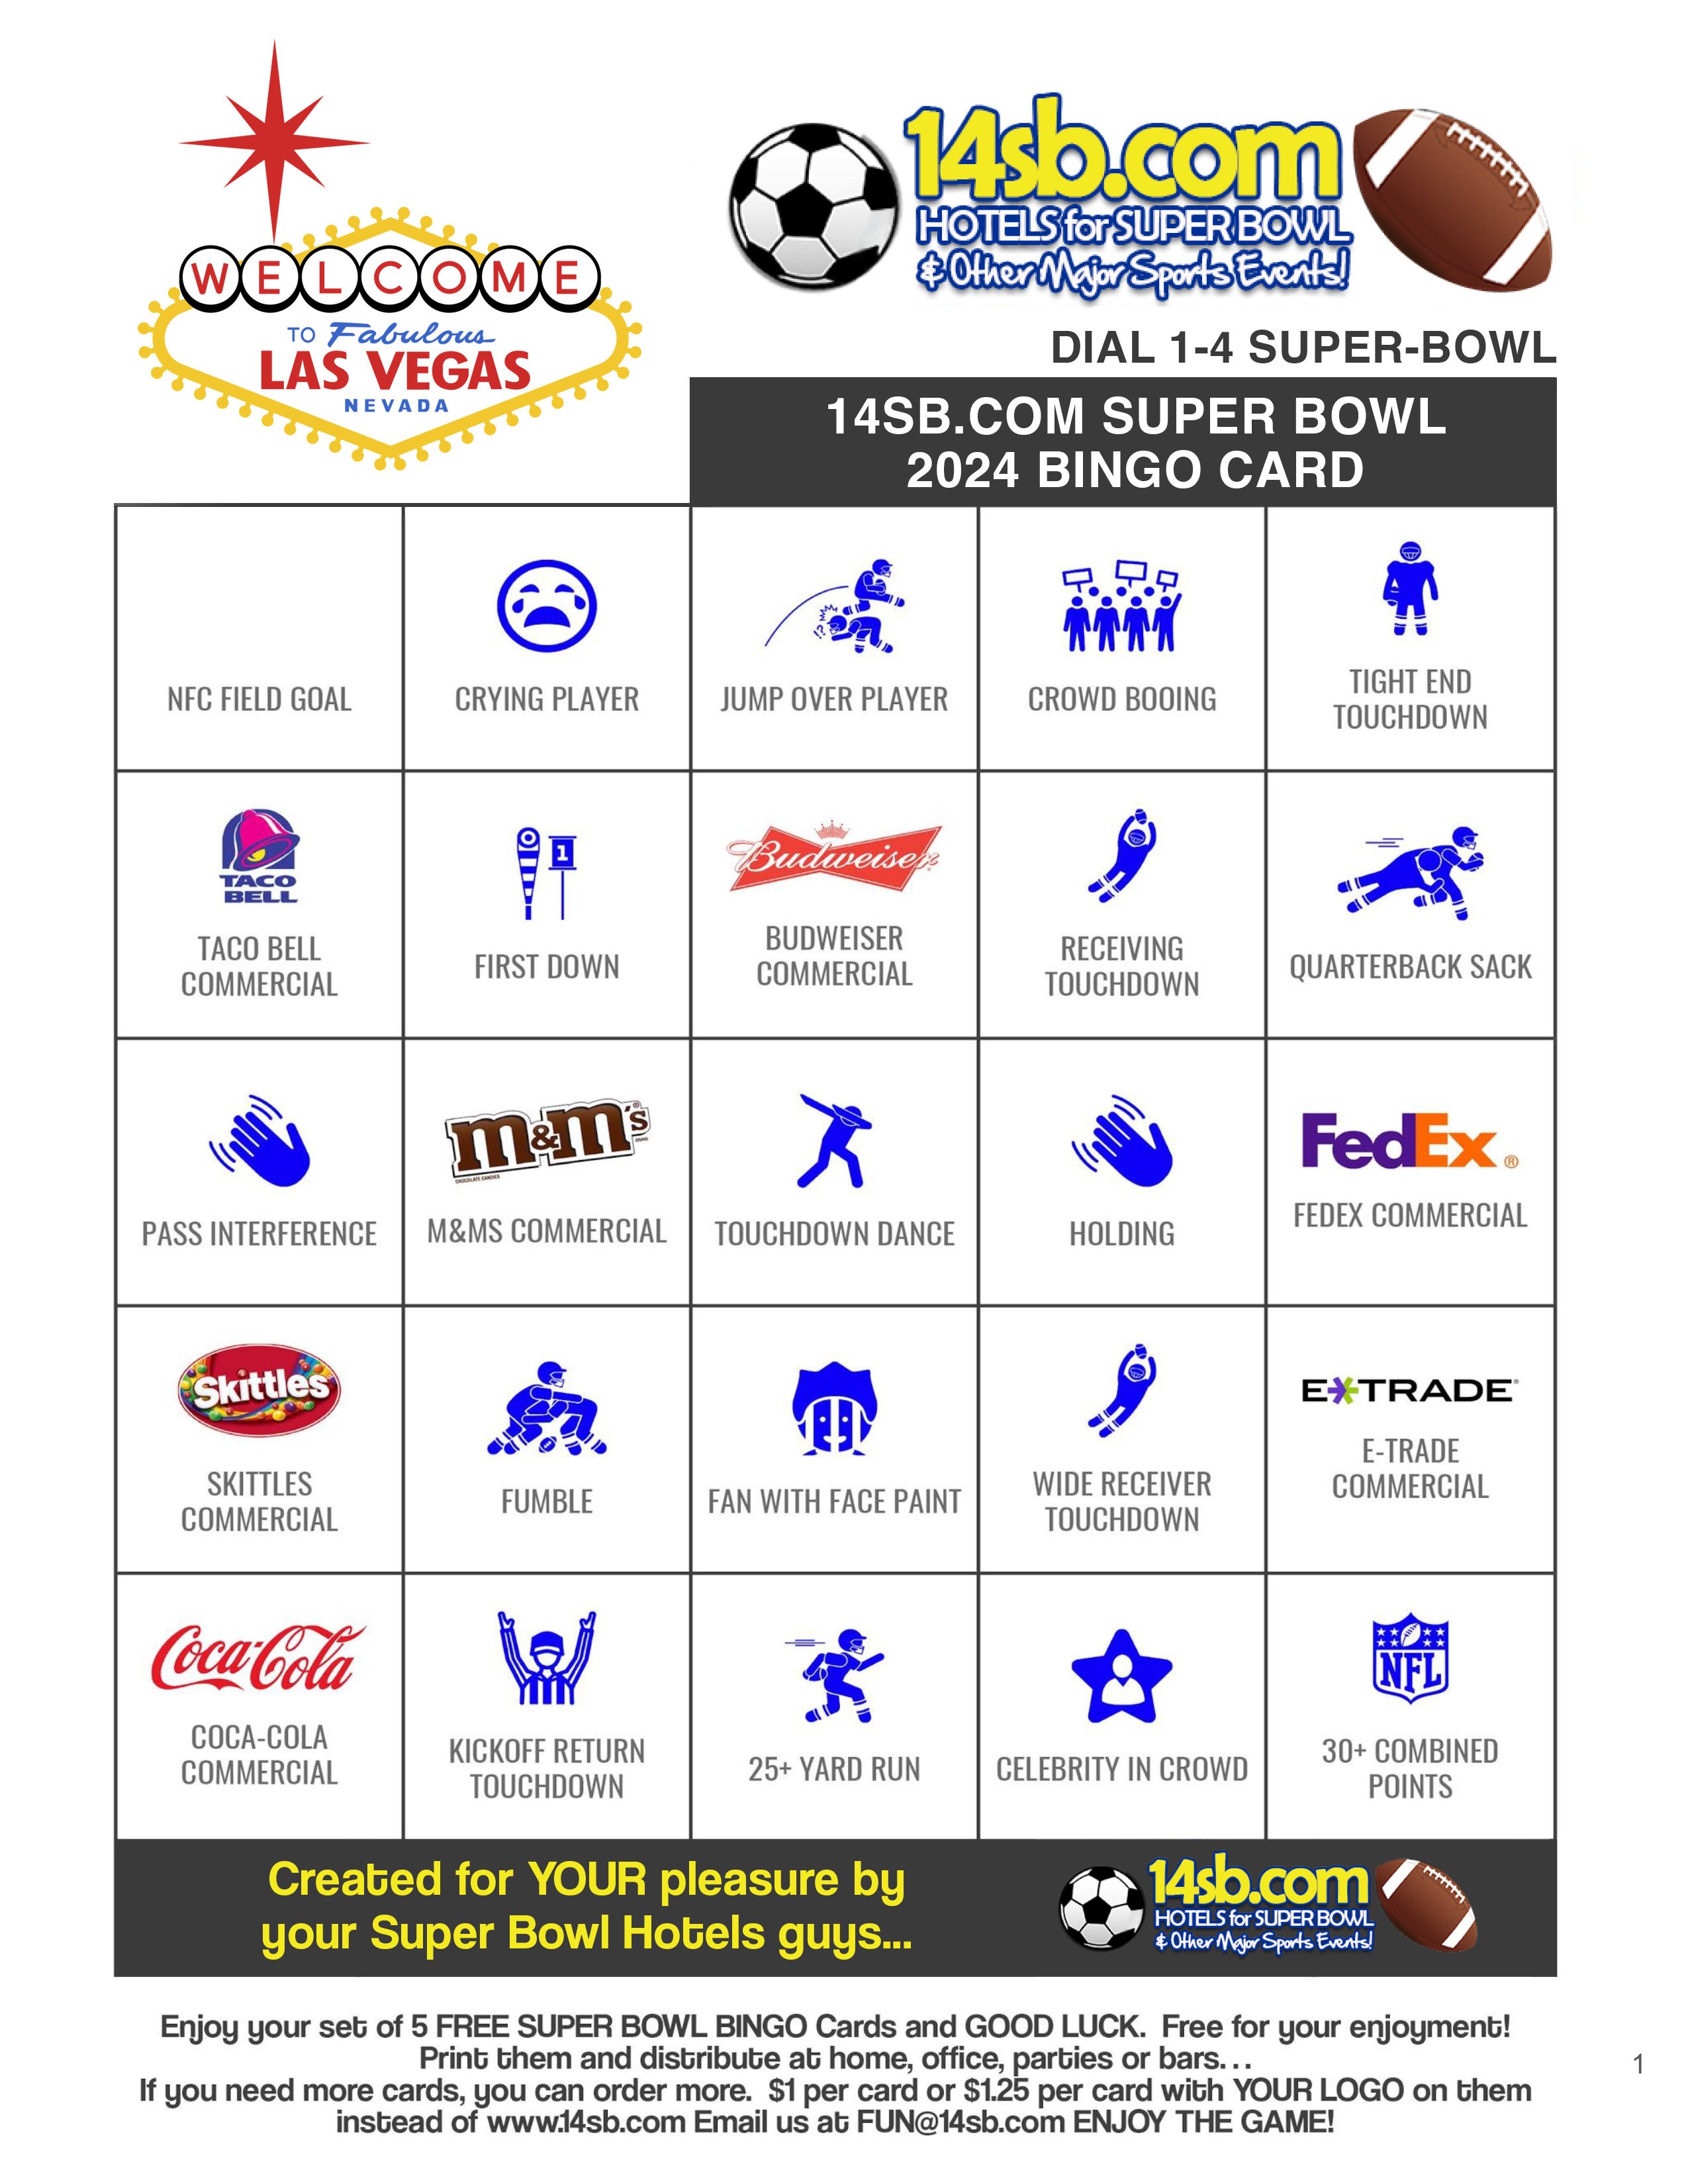 Click Here to download your Super Bowl Bingo card!